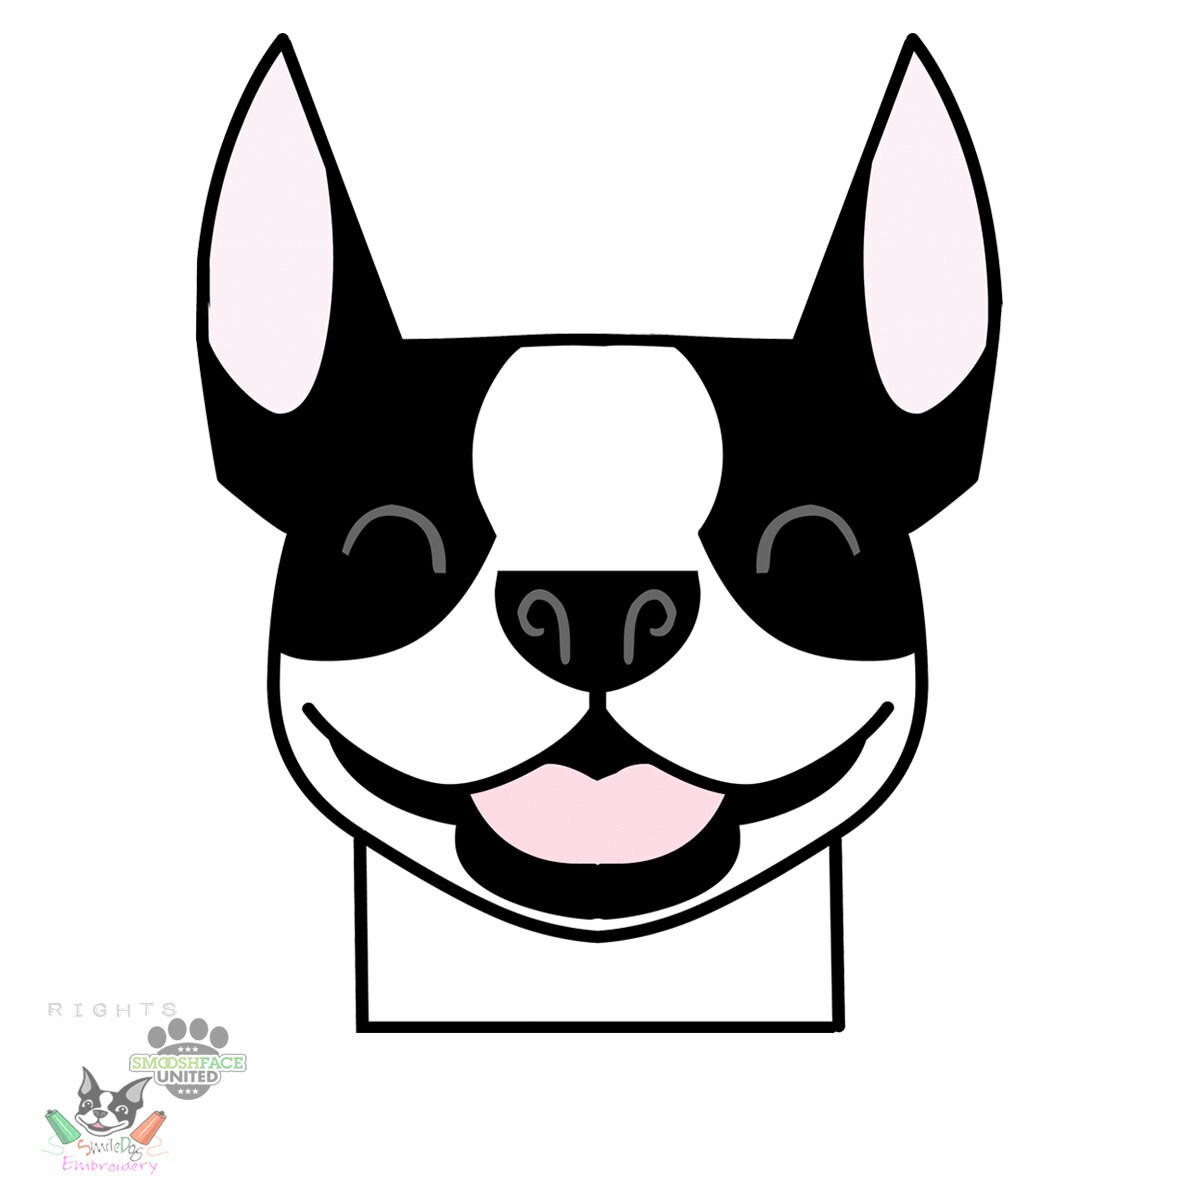 Boston Terrier Car Decal Sticker Silly By SmooshfaceUnited.